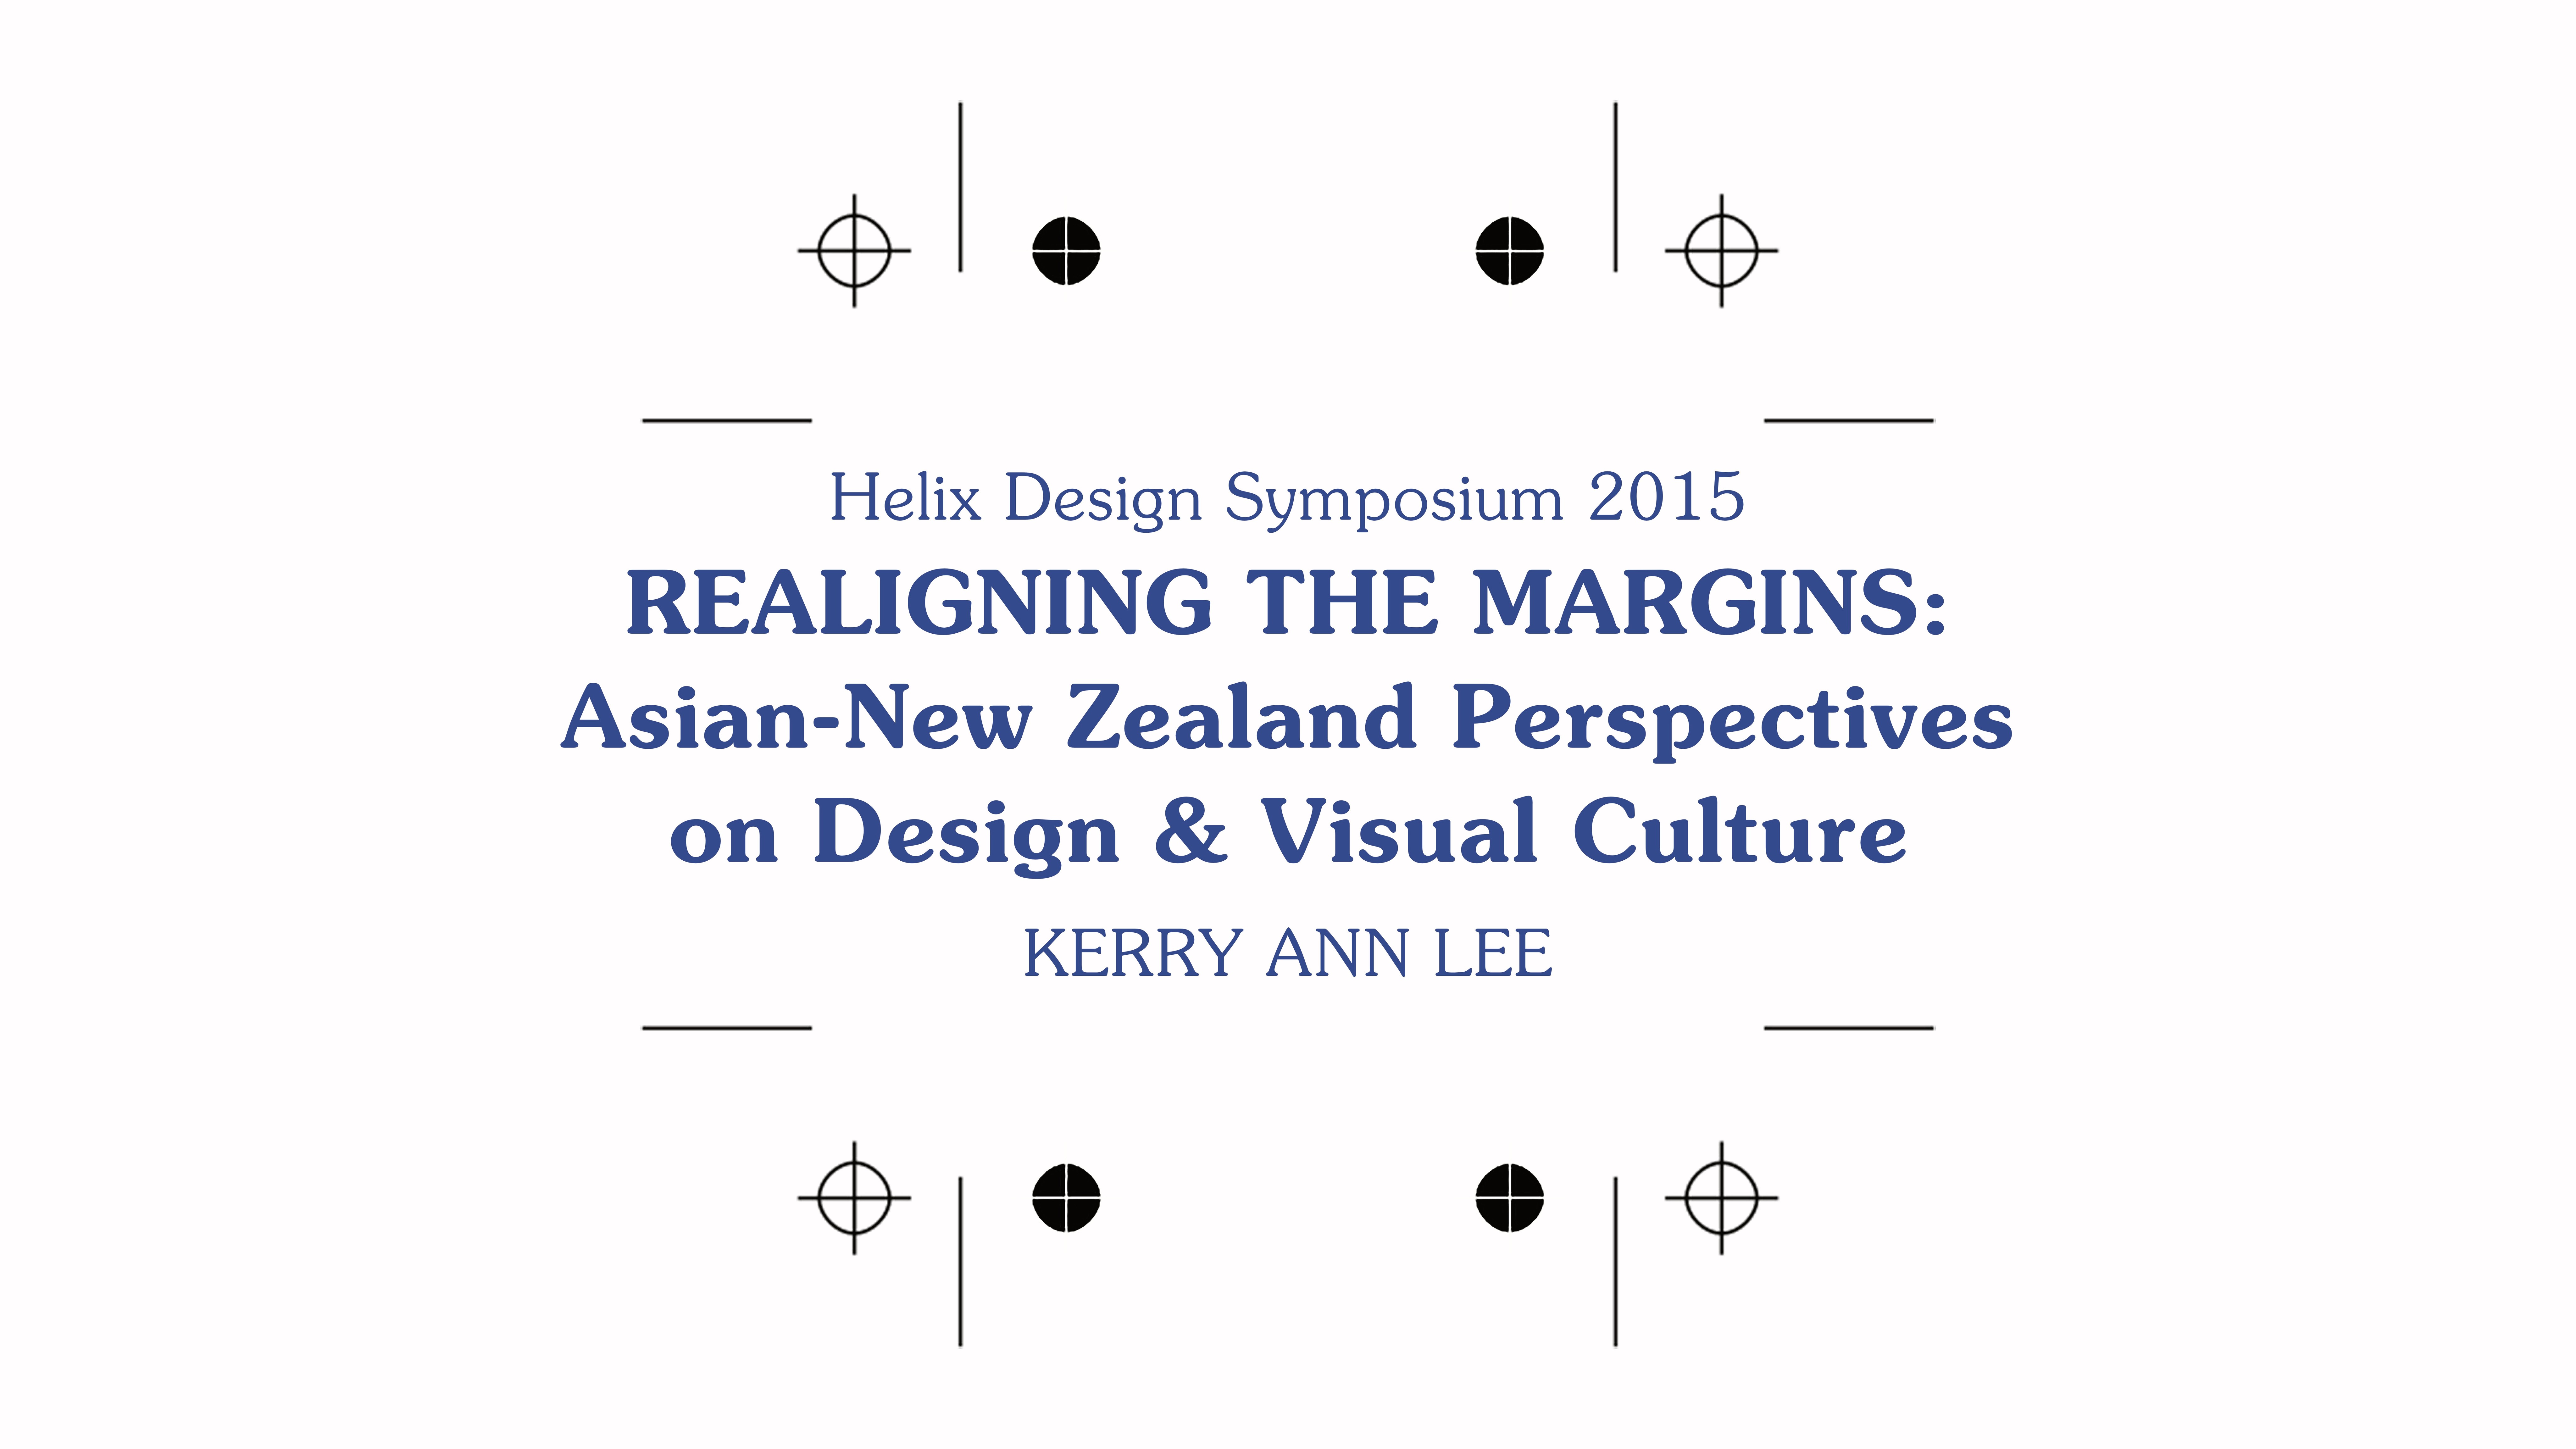 Title slide with Kerry Ann Lee's name and the presentation title